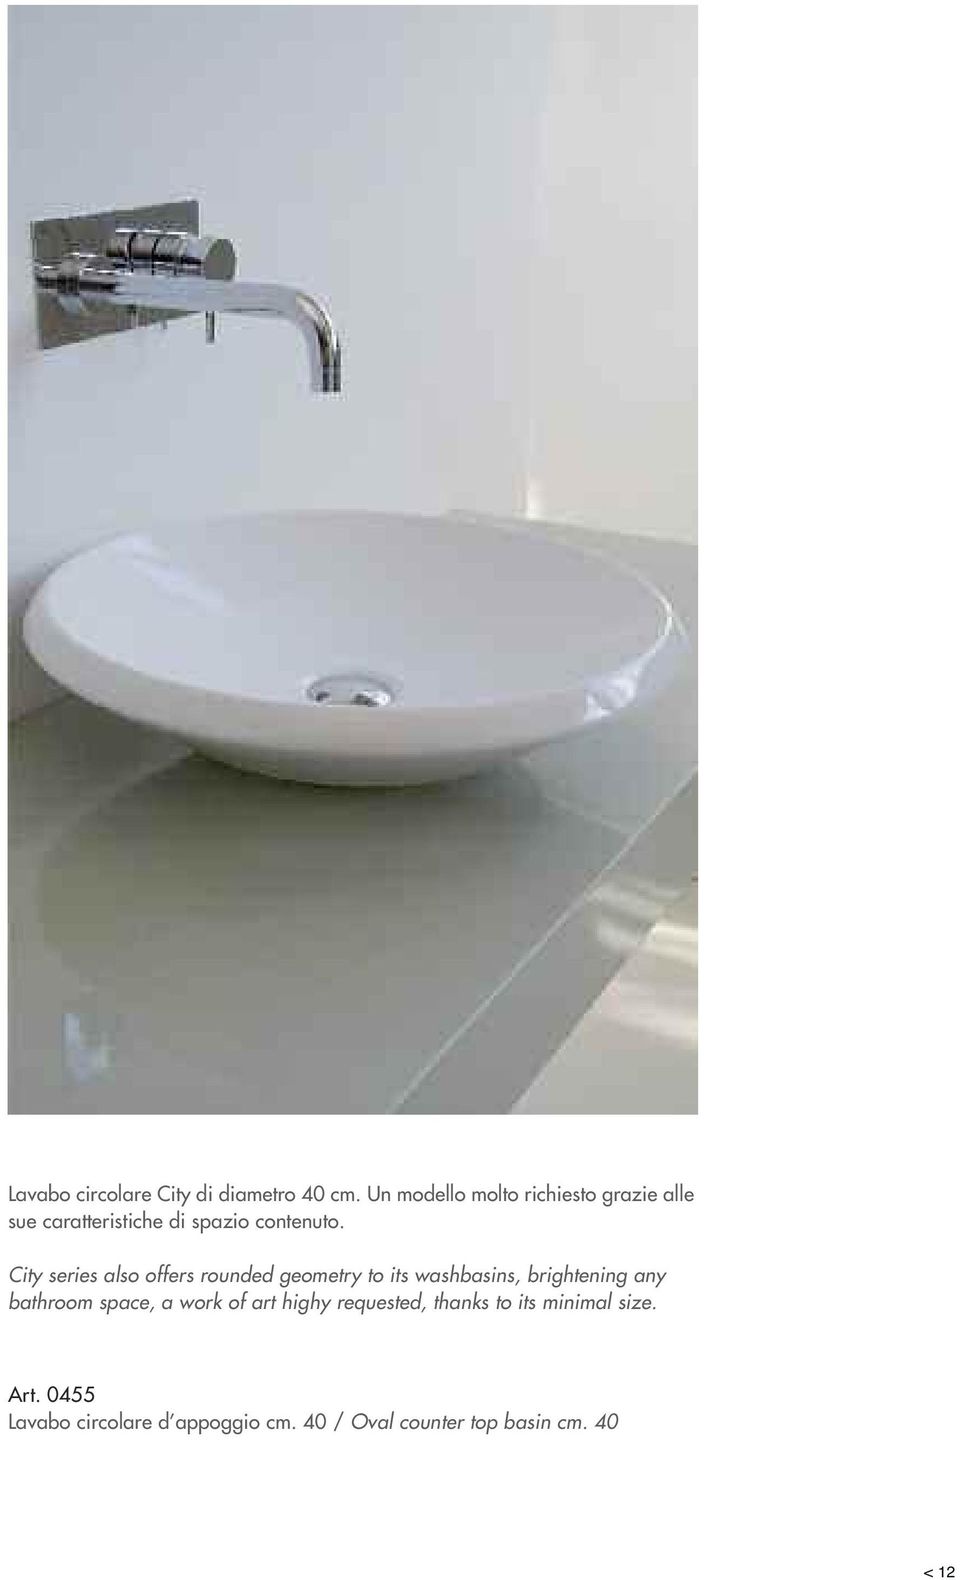 City series also offers rounded geometry to its washbasins, brightening any bathroom